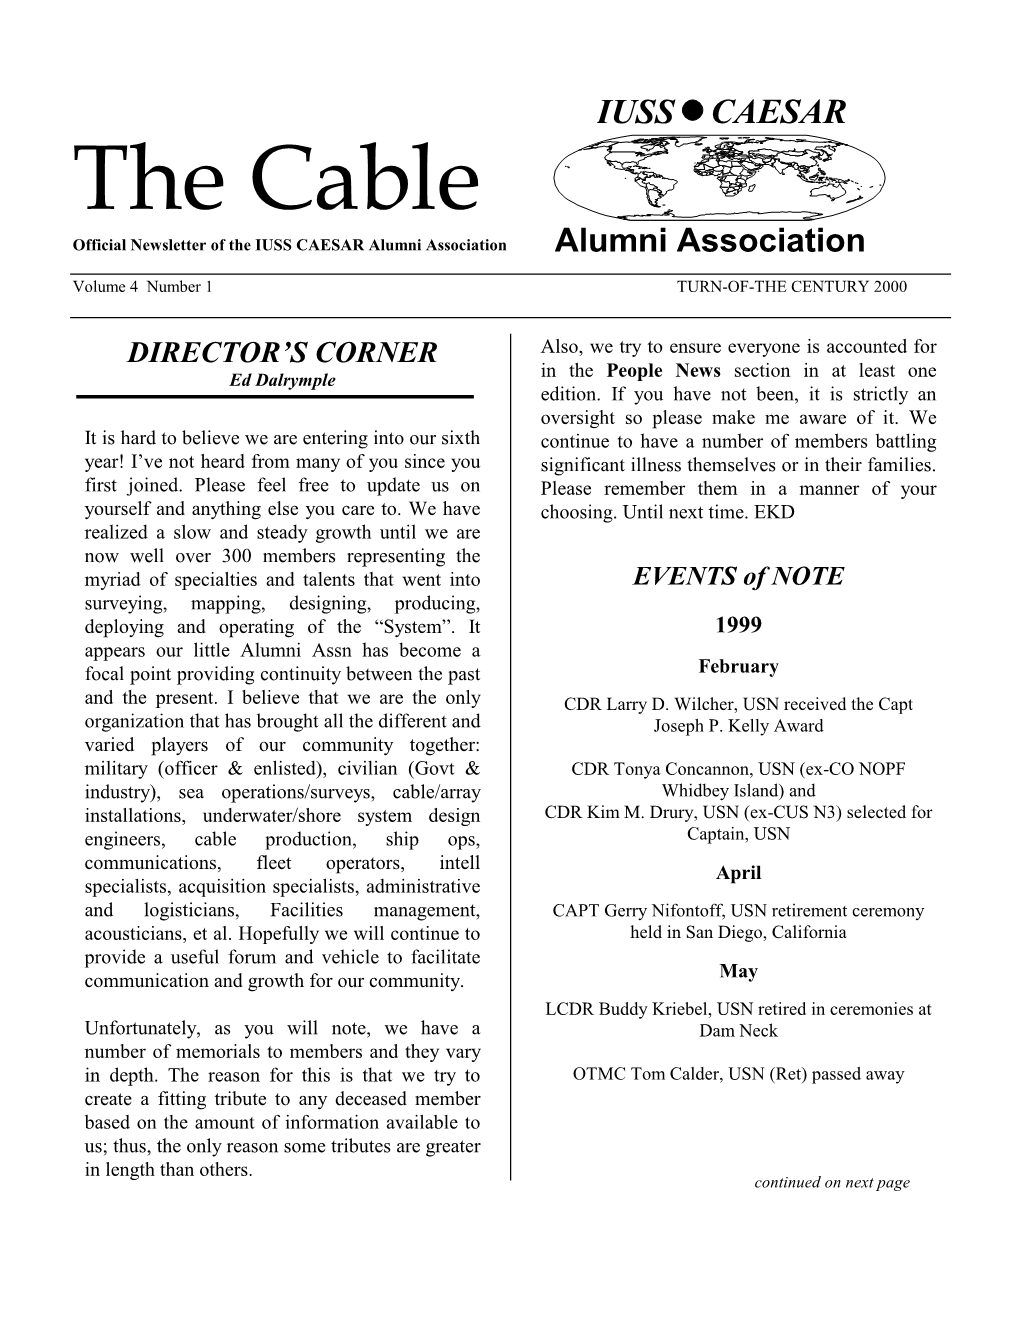 The Cable Spring 2000